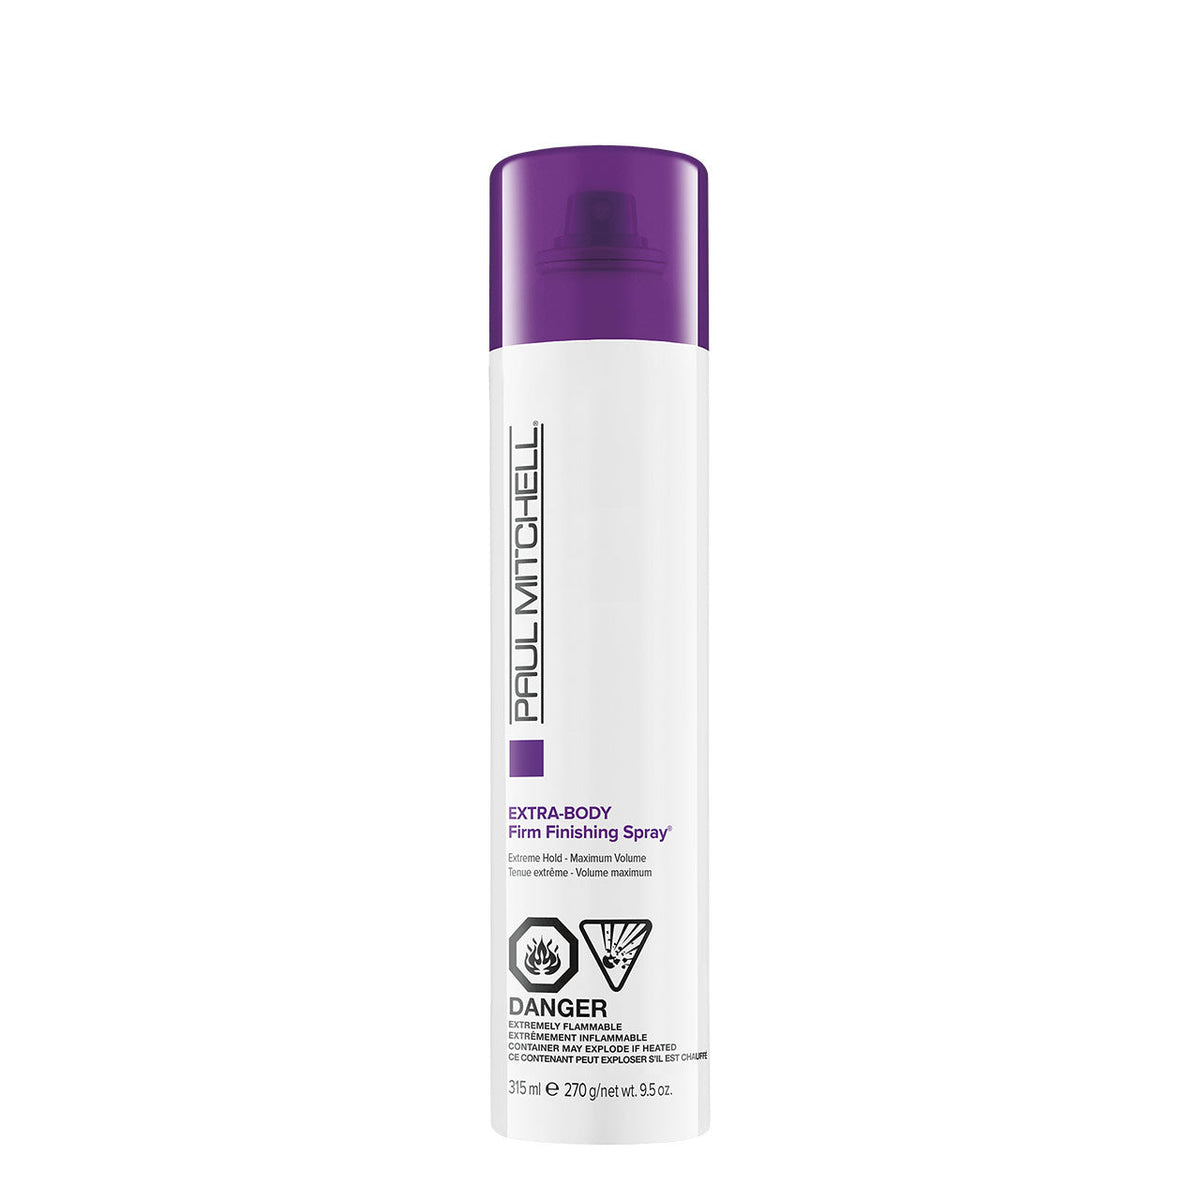 Extra-Body Firm Finishing Spray - by Paul Mitchell |ProCare Outlet|